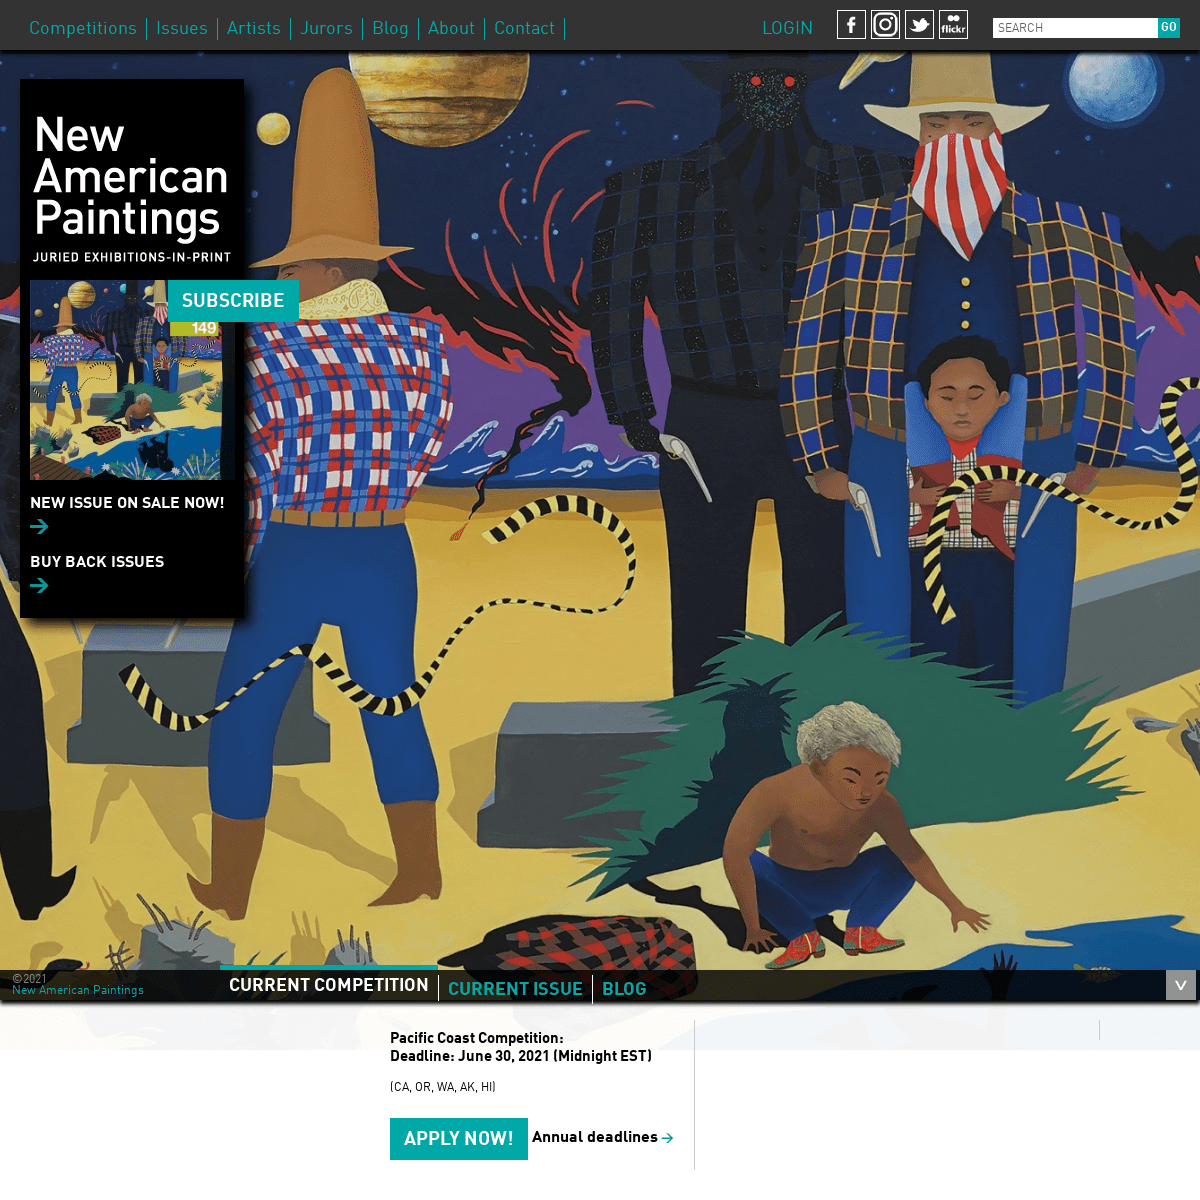 A complete backup of https://newamericanpaintings.com